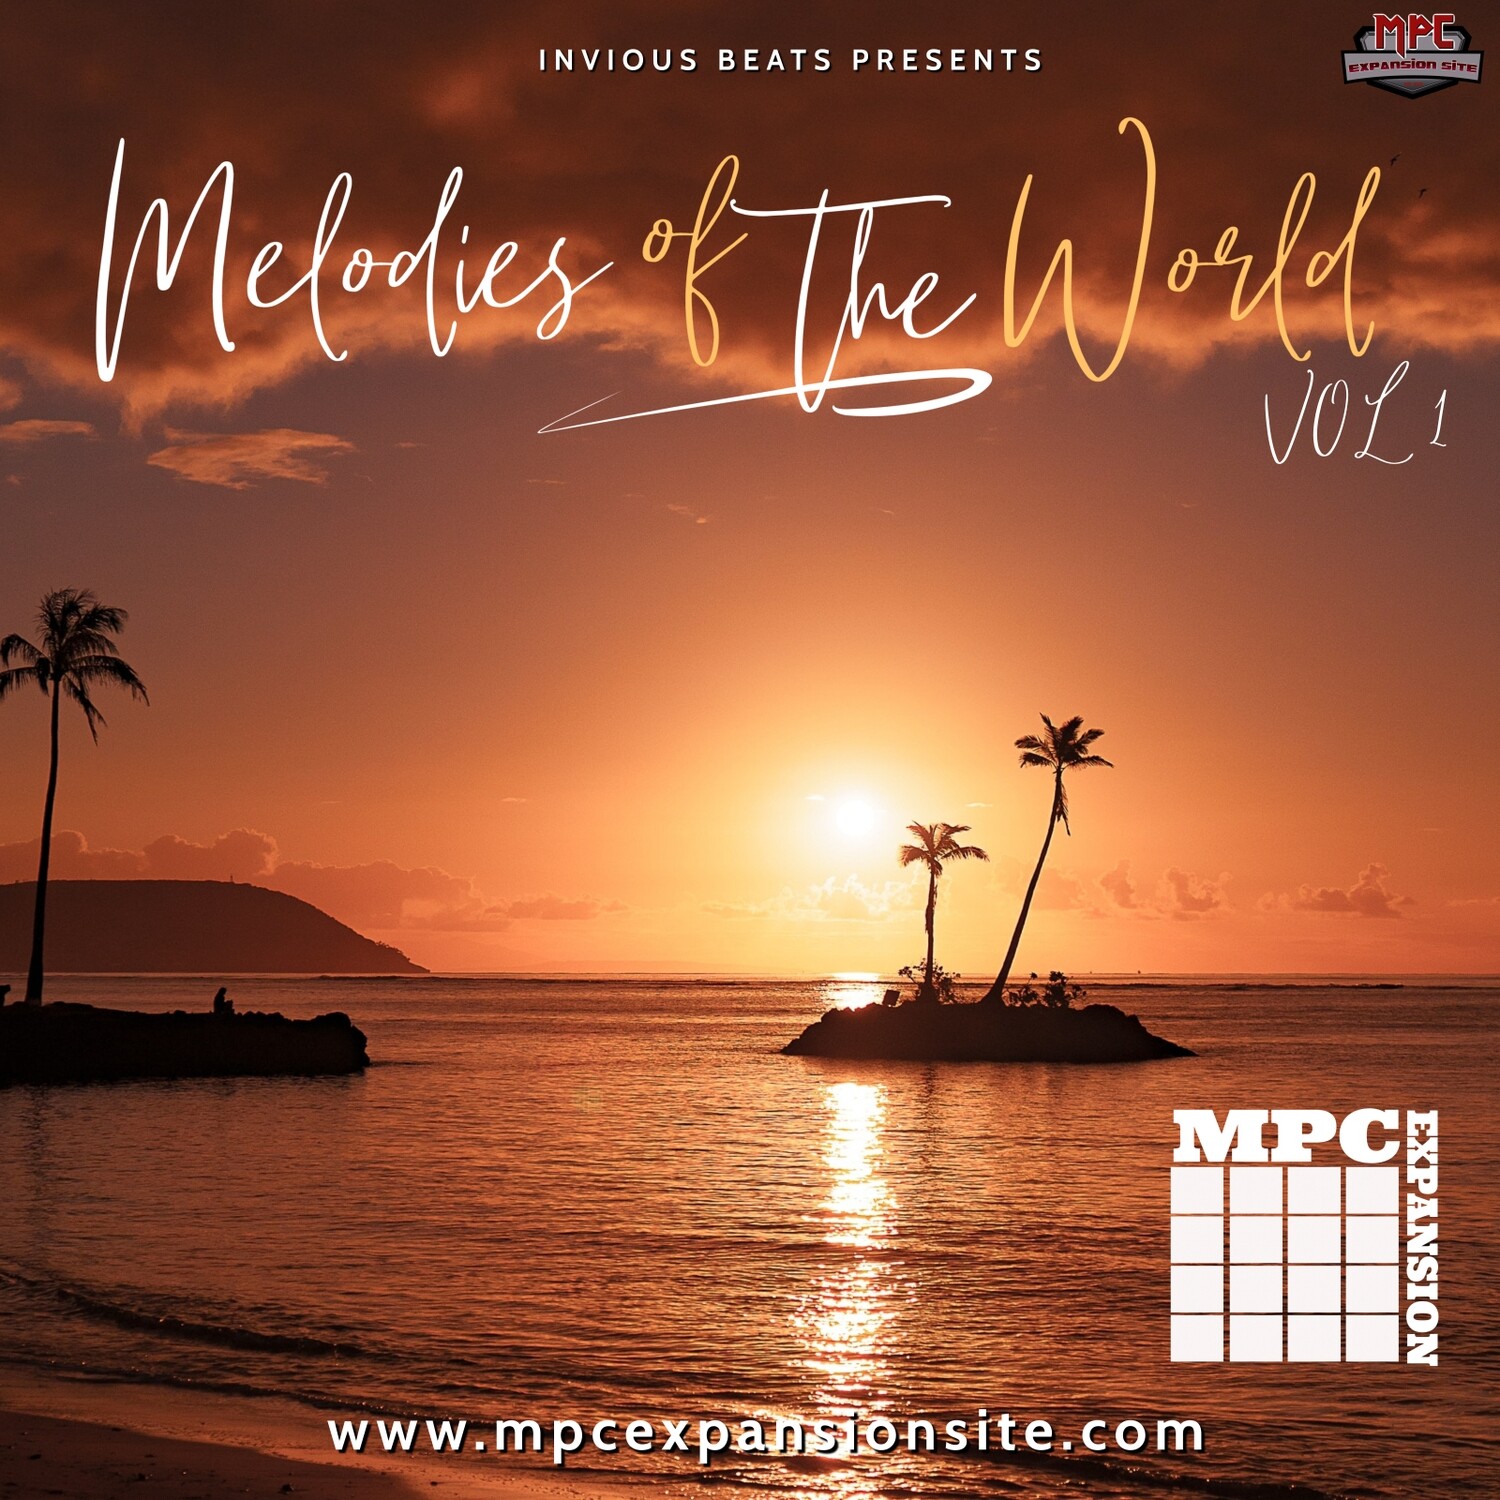 MPC EXPANSION 'MELODIES OF THE WORLD VOL1' by INVIOUS